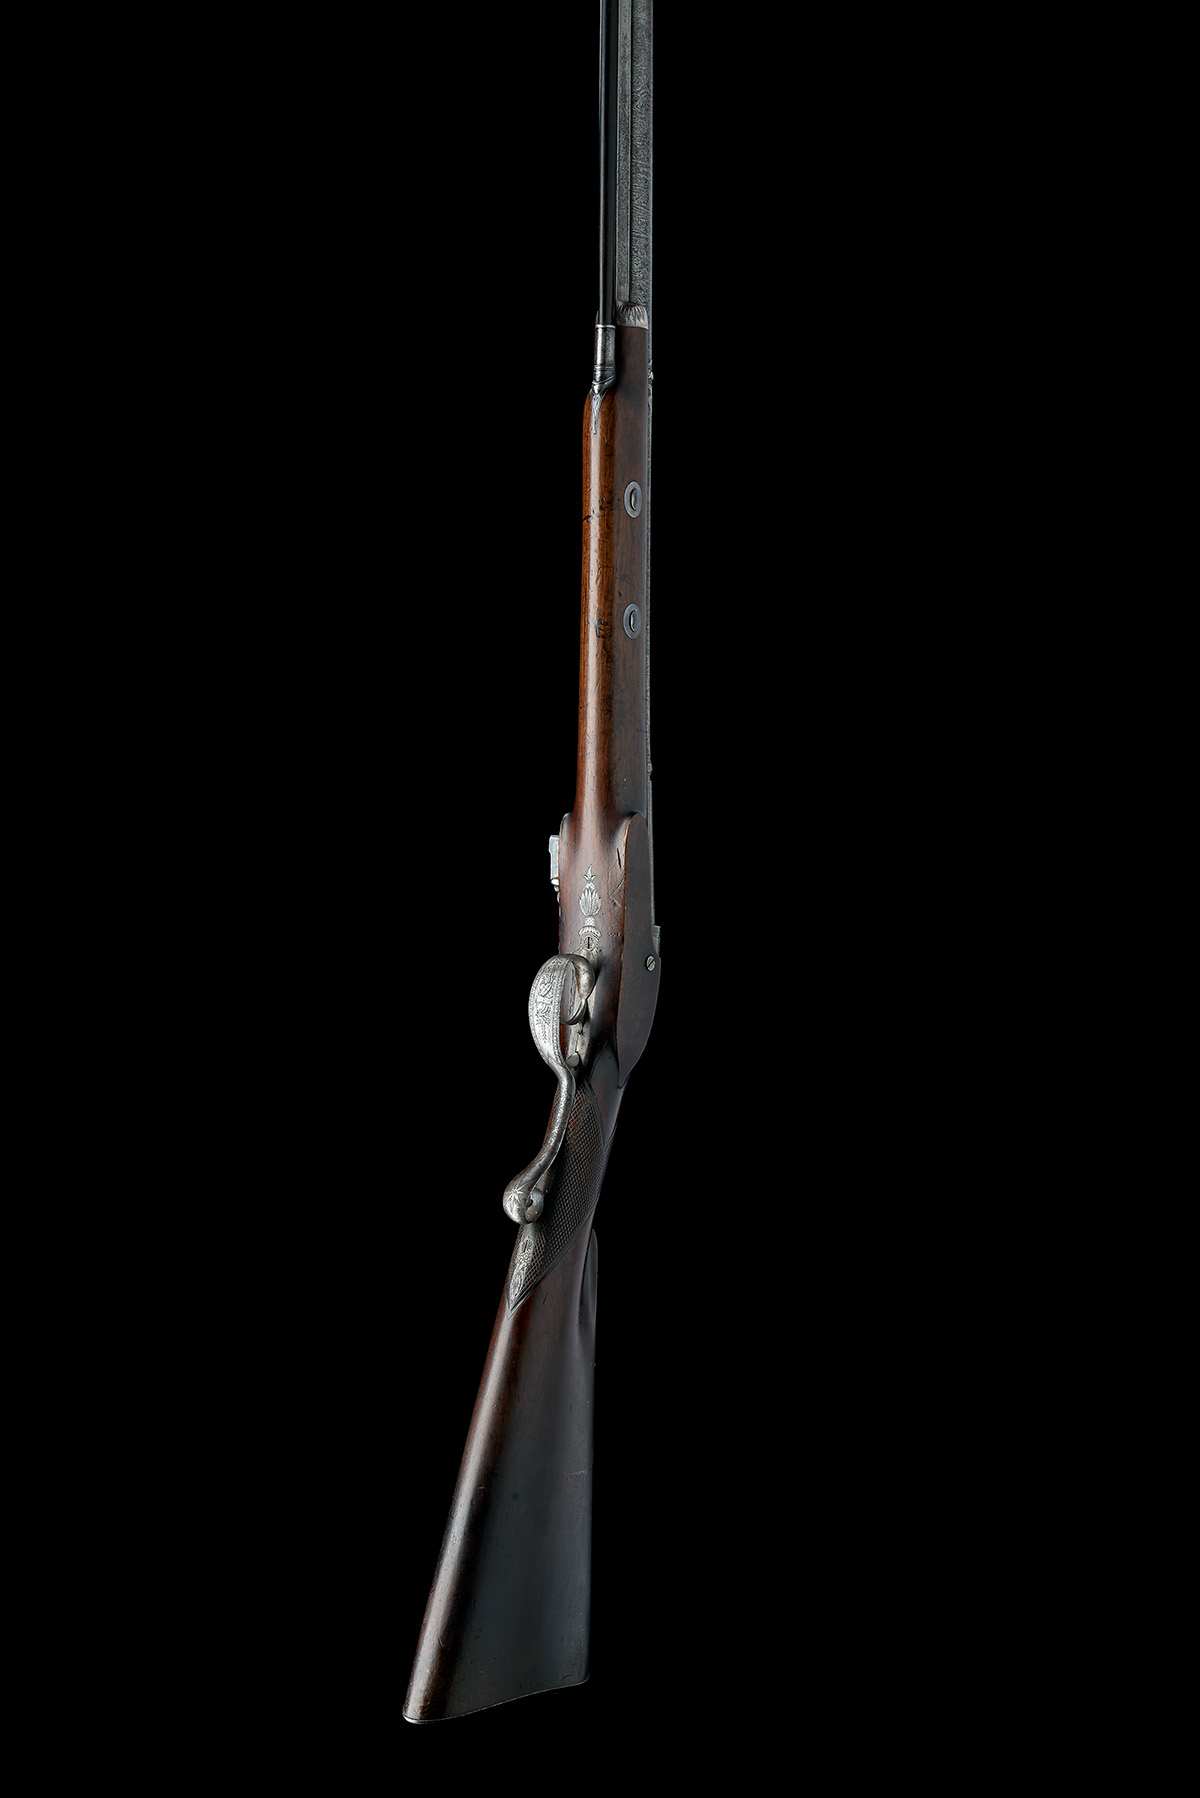 A FINE 10-BORE FLINTLOCK SPORTING MUSKET SIGNED MACLAUCHLAN, EDINBURGH, WITH INLAID TURKISH - Image 6 of 10